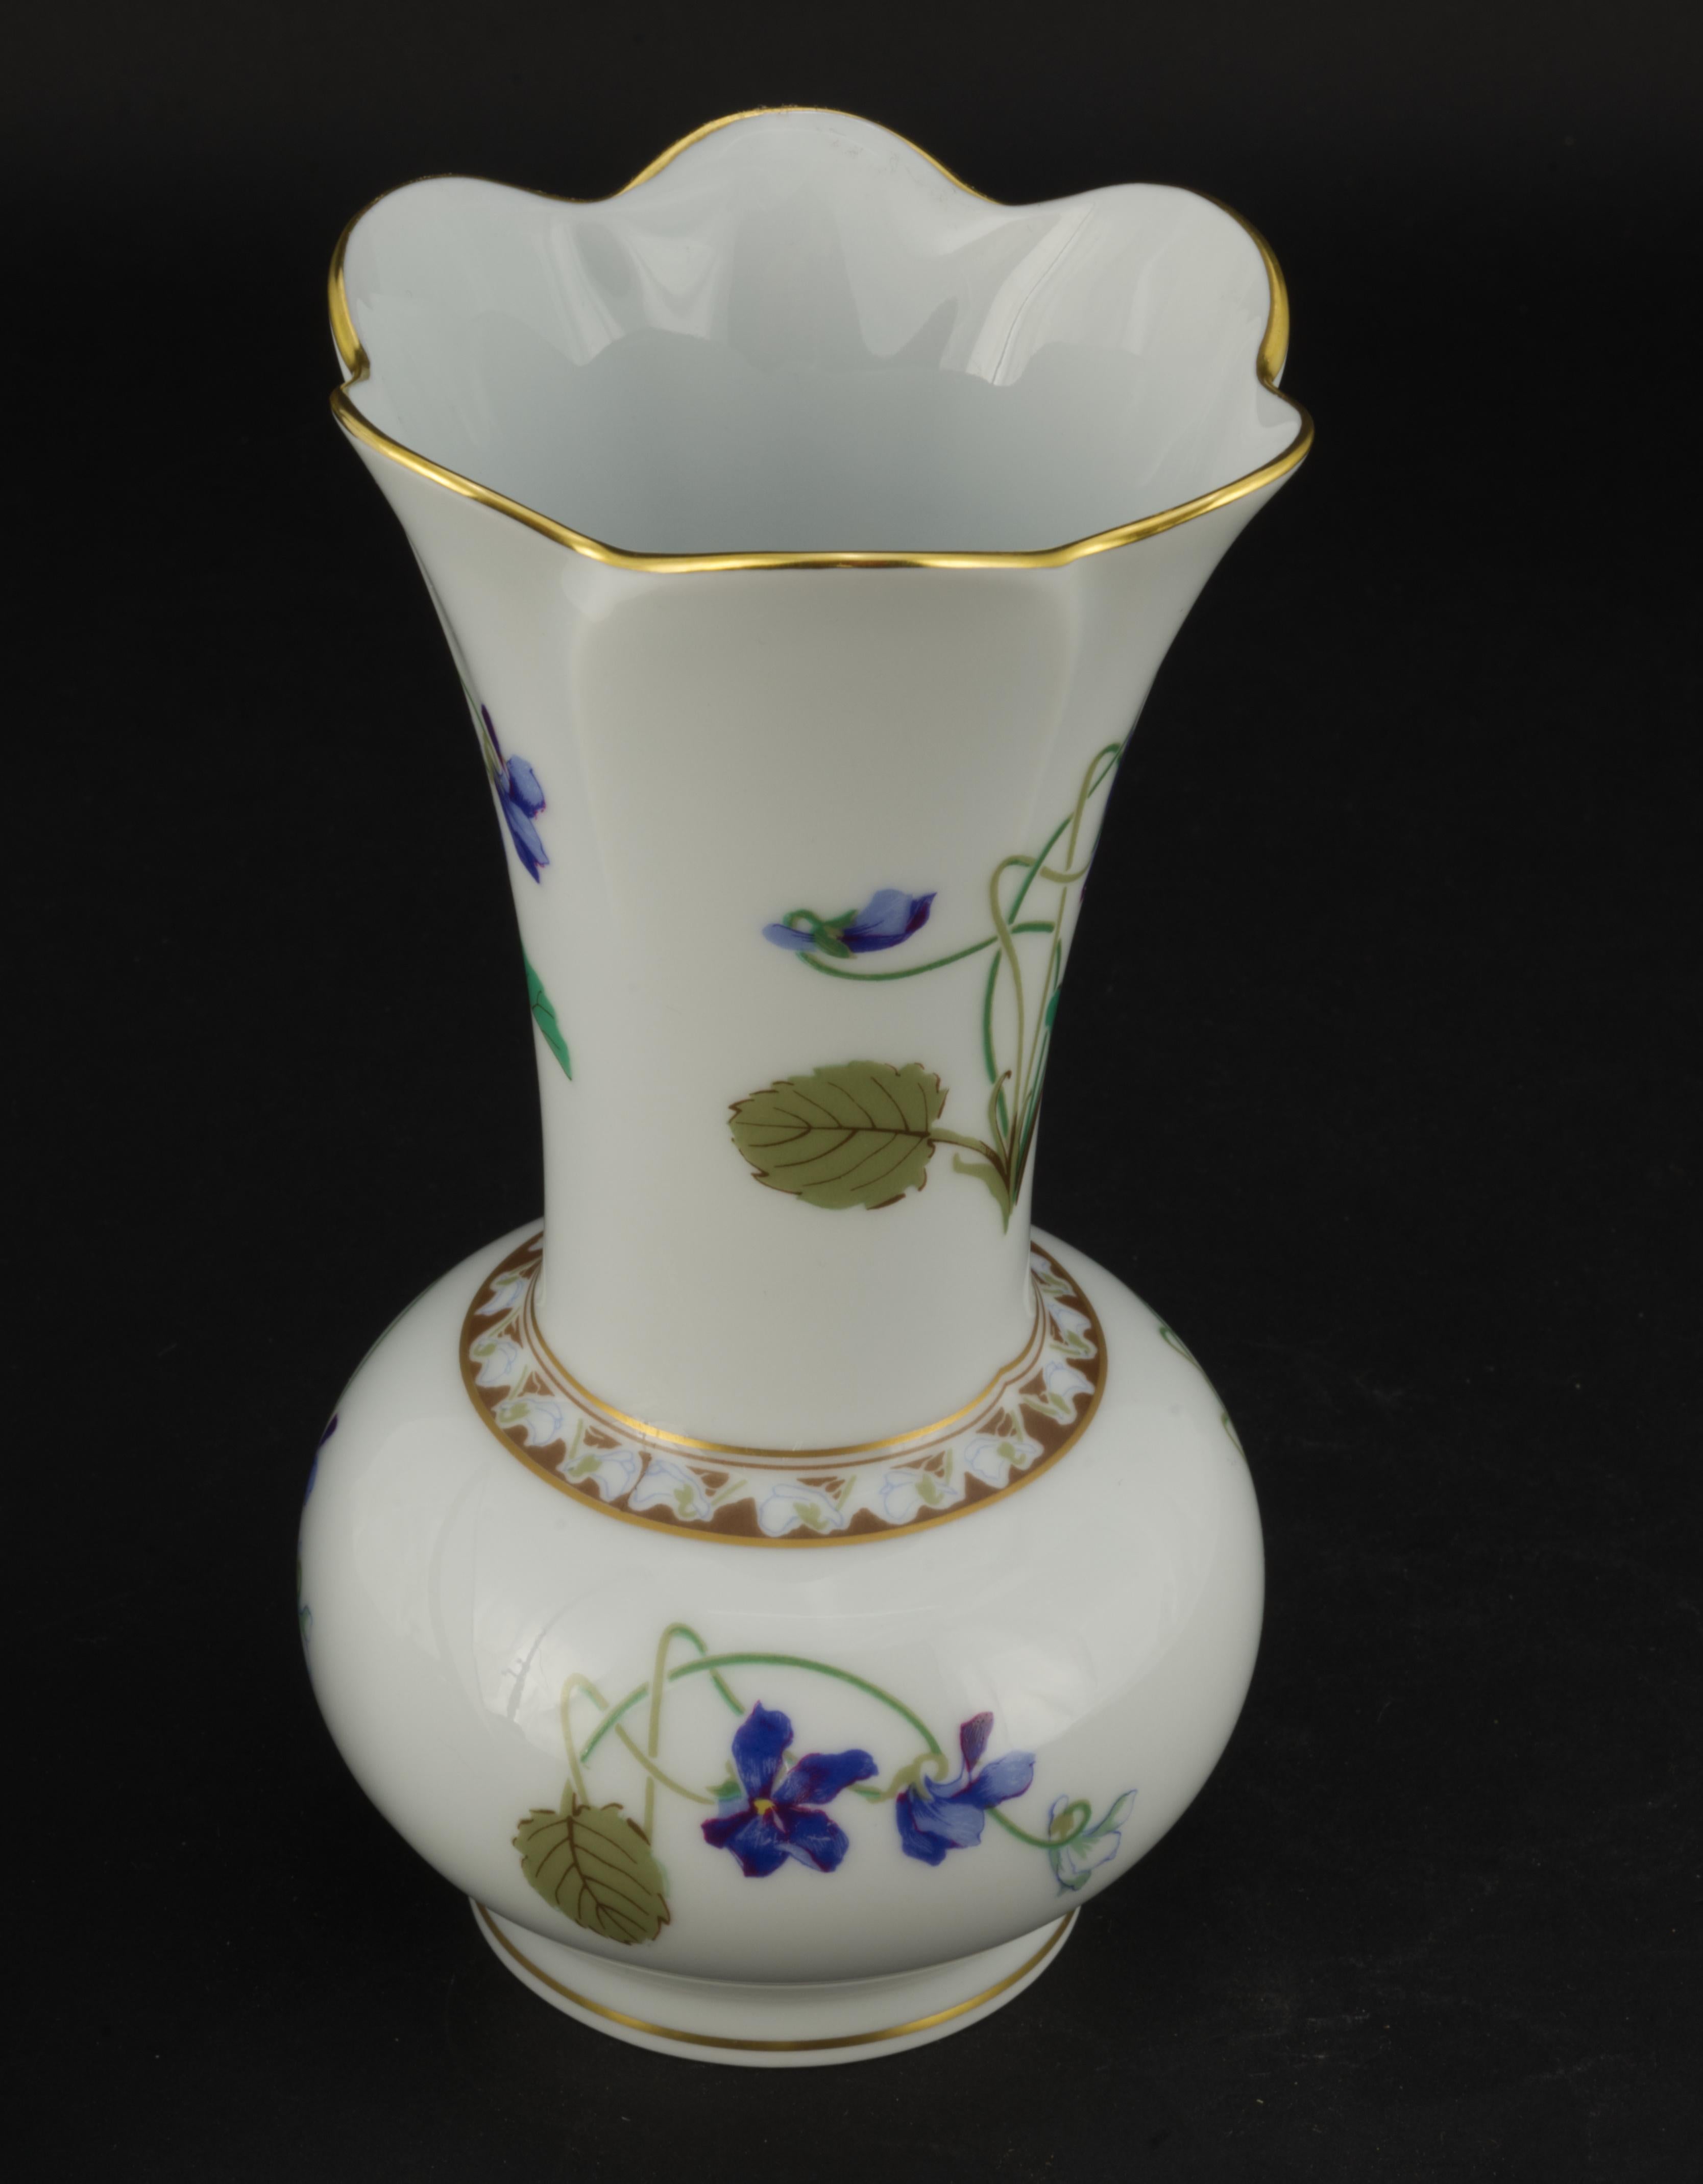 Haviland Limoges France Imperatrice Eugenie Vase In Good Condition For Sale In Clifton Springs, NY